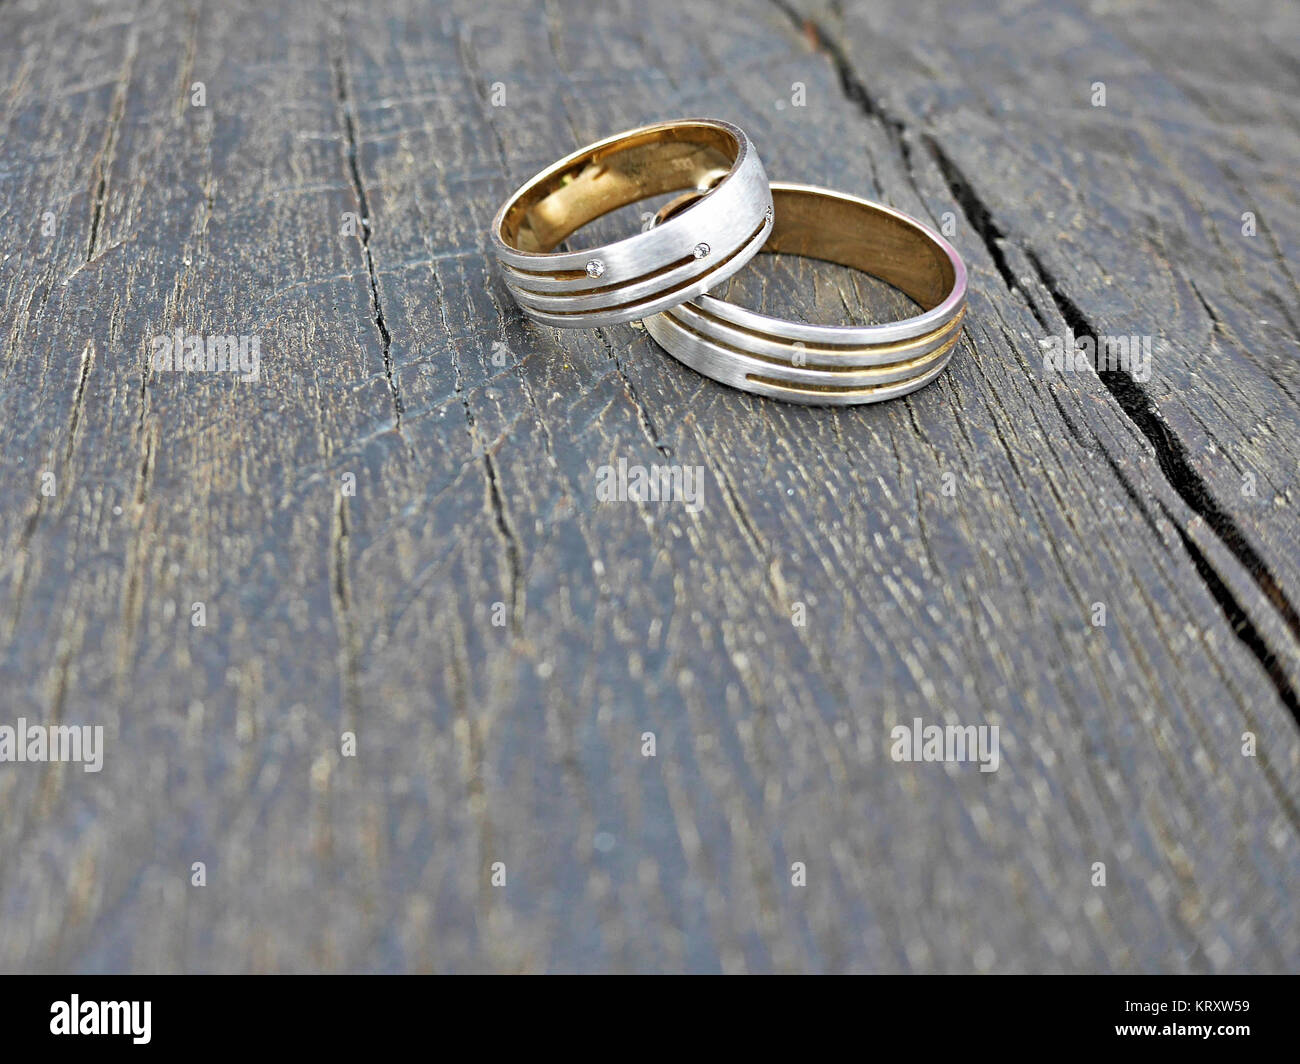 wedding and the wedding rings Stock Photo